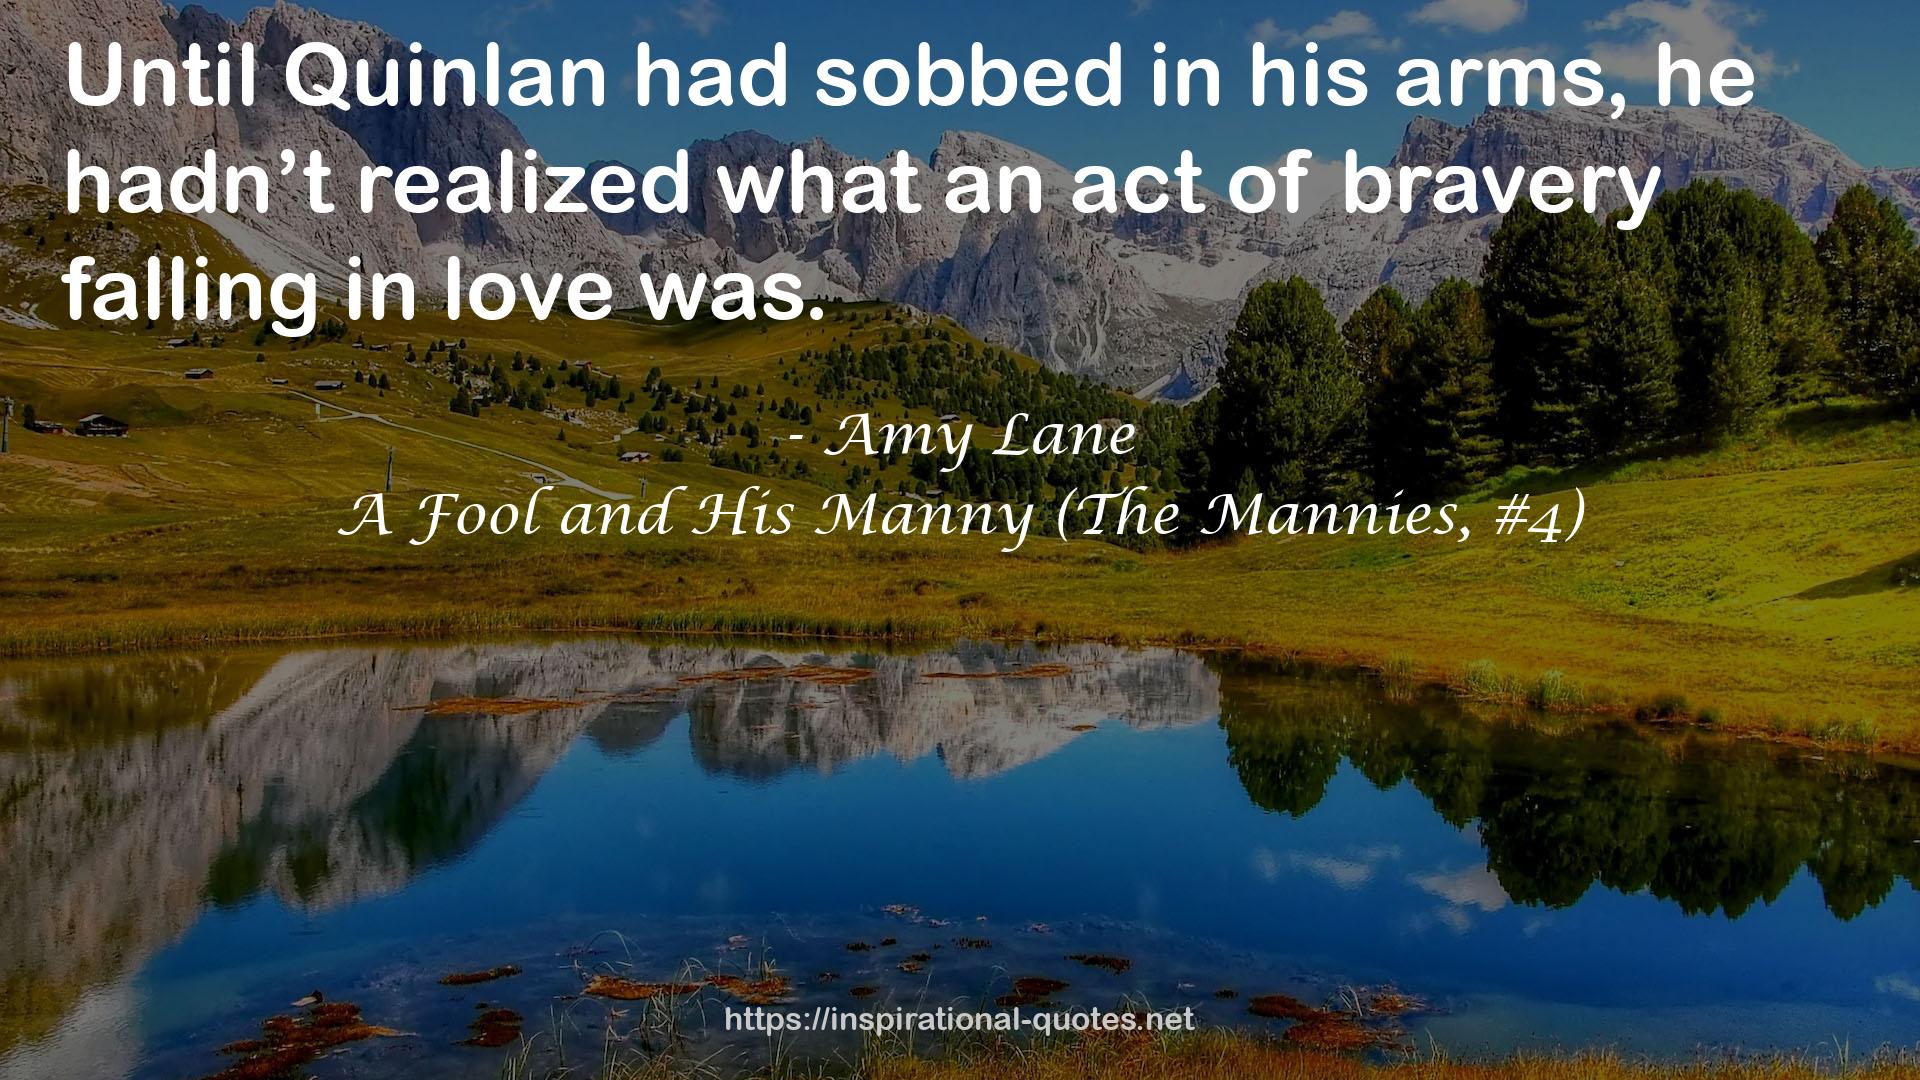 A Fool and His Manny (The Mannies, #4) QUOTES